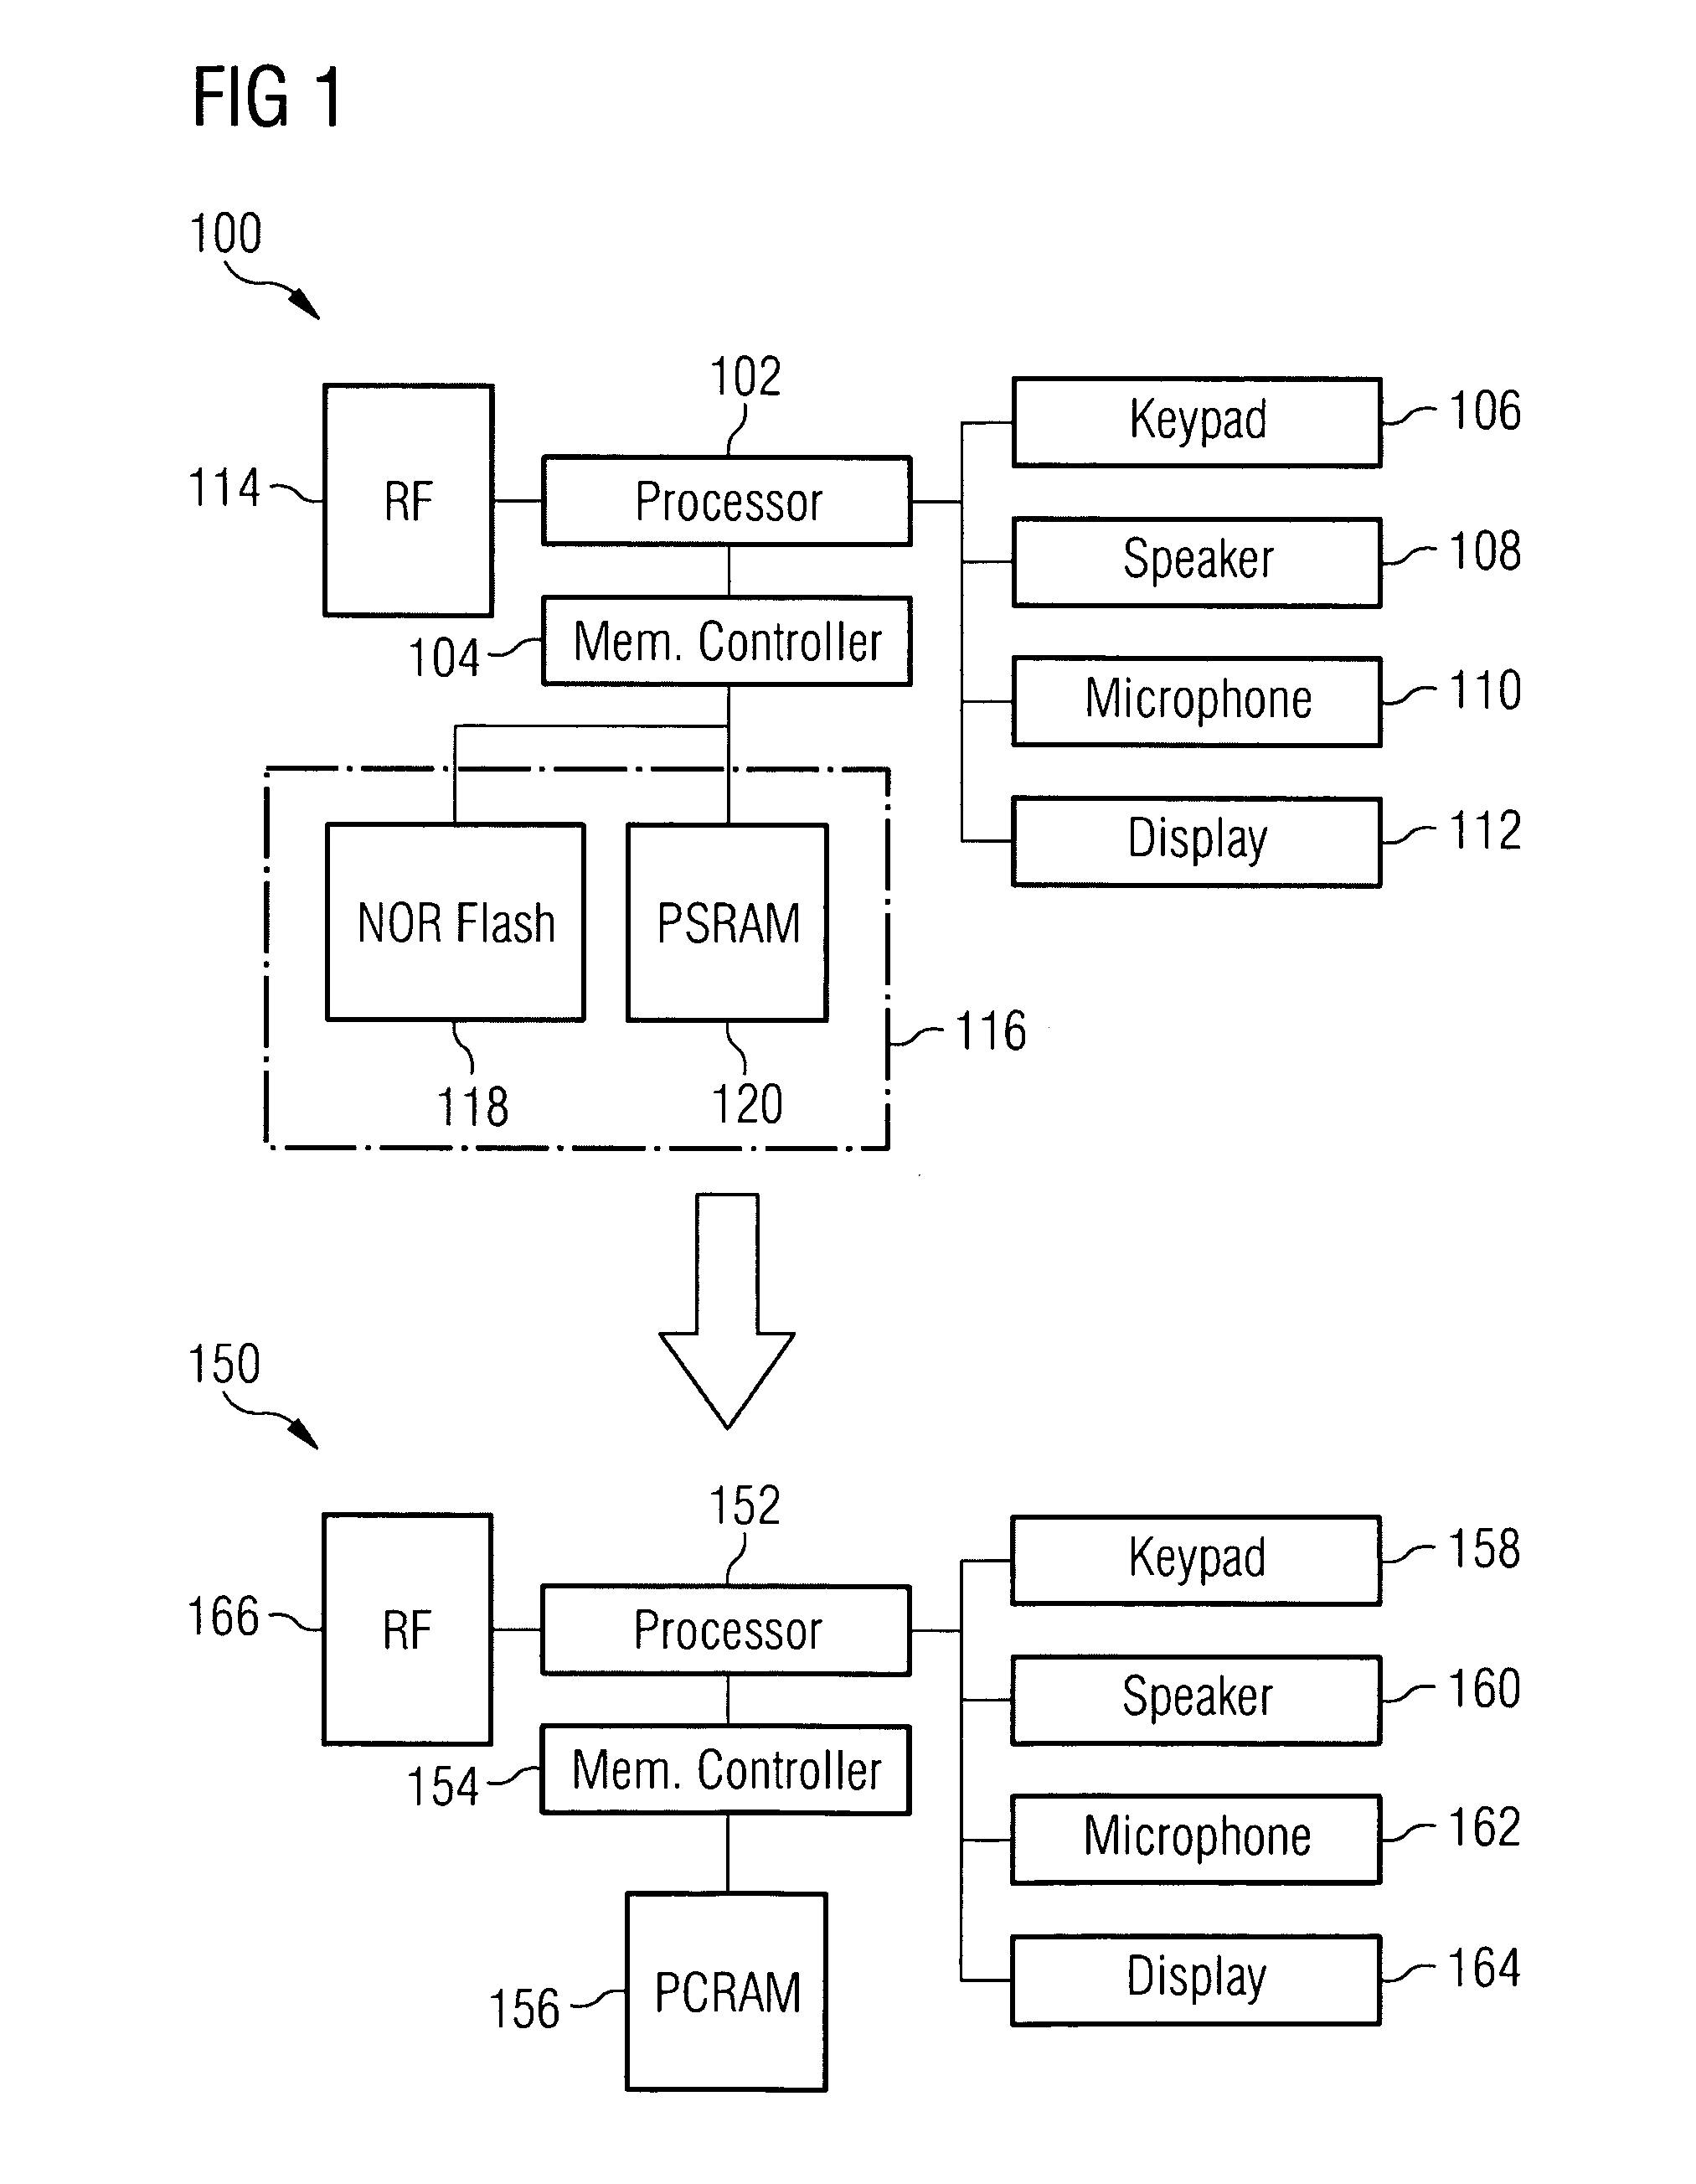 Emulated Combination Memory Device